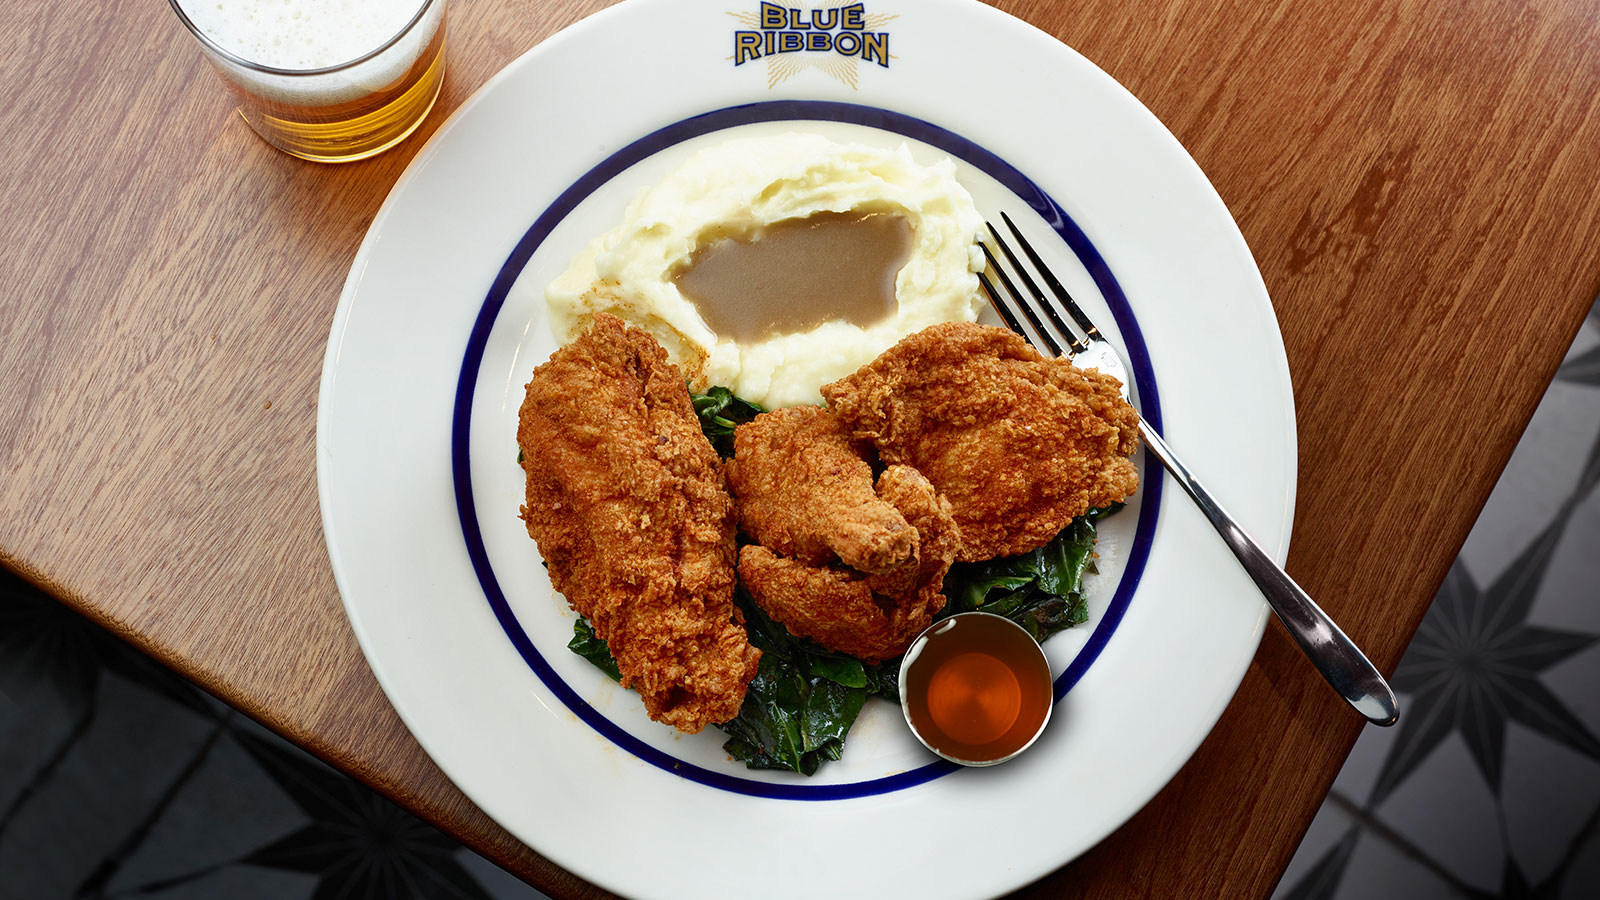 Fried chicken at Blue Ribbon